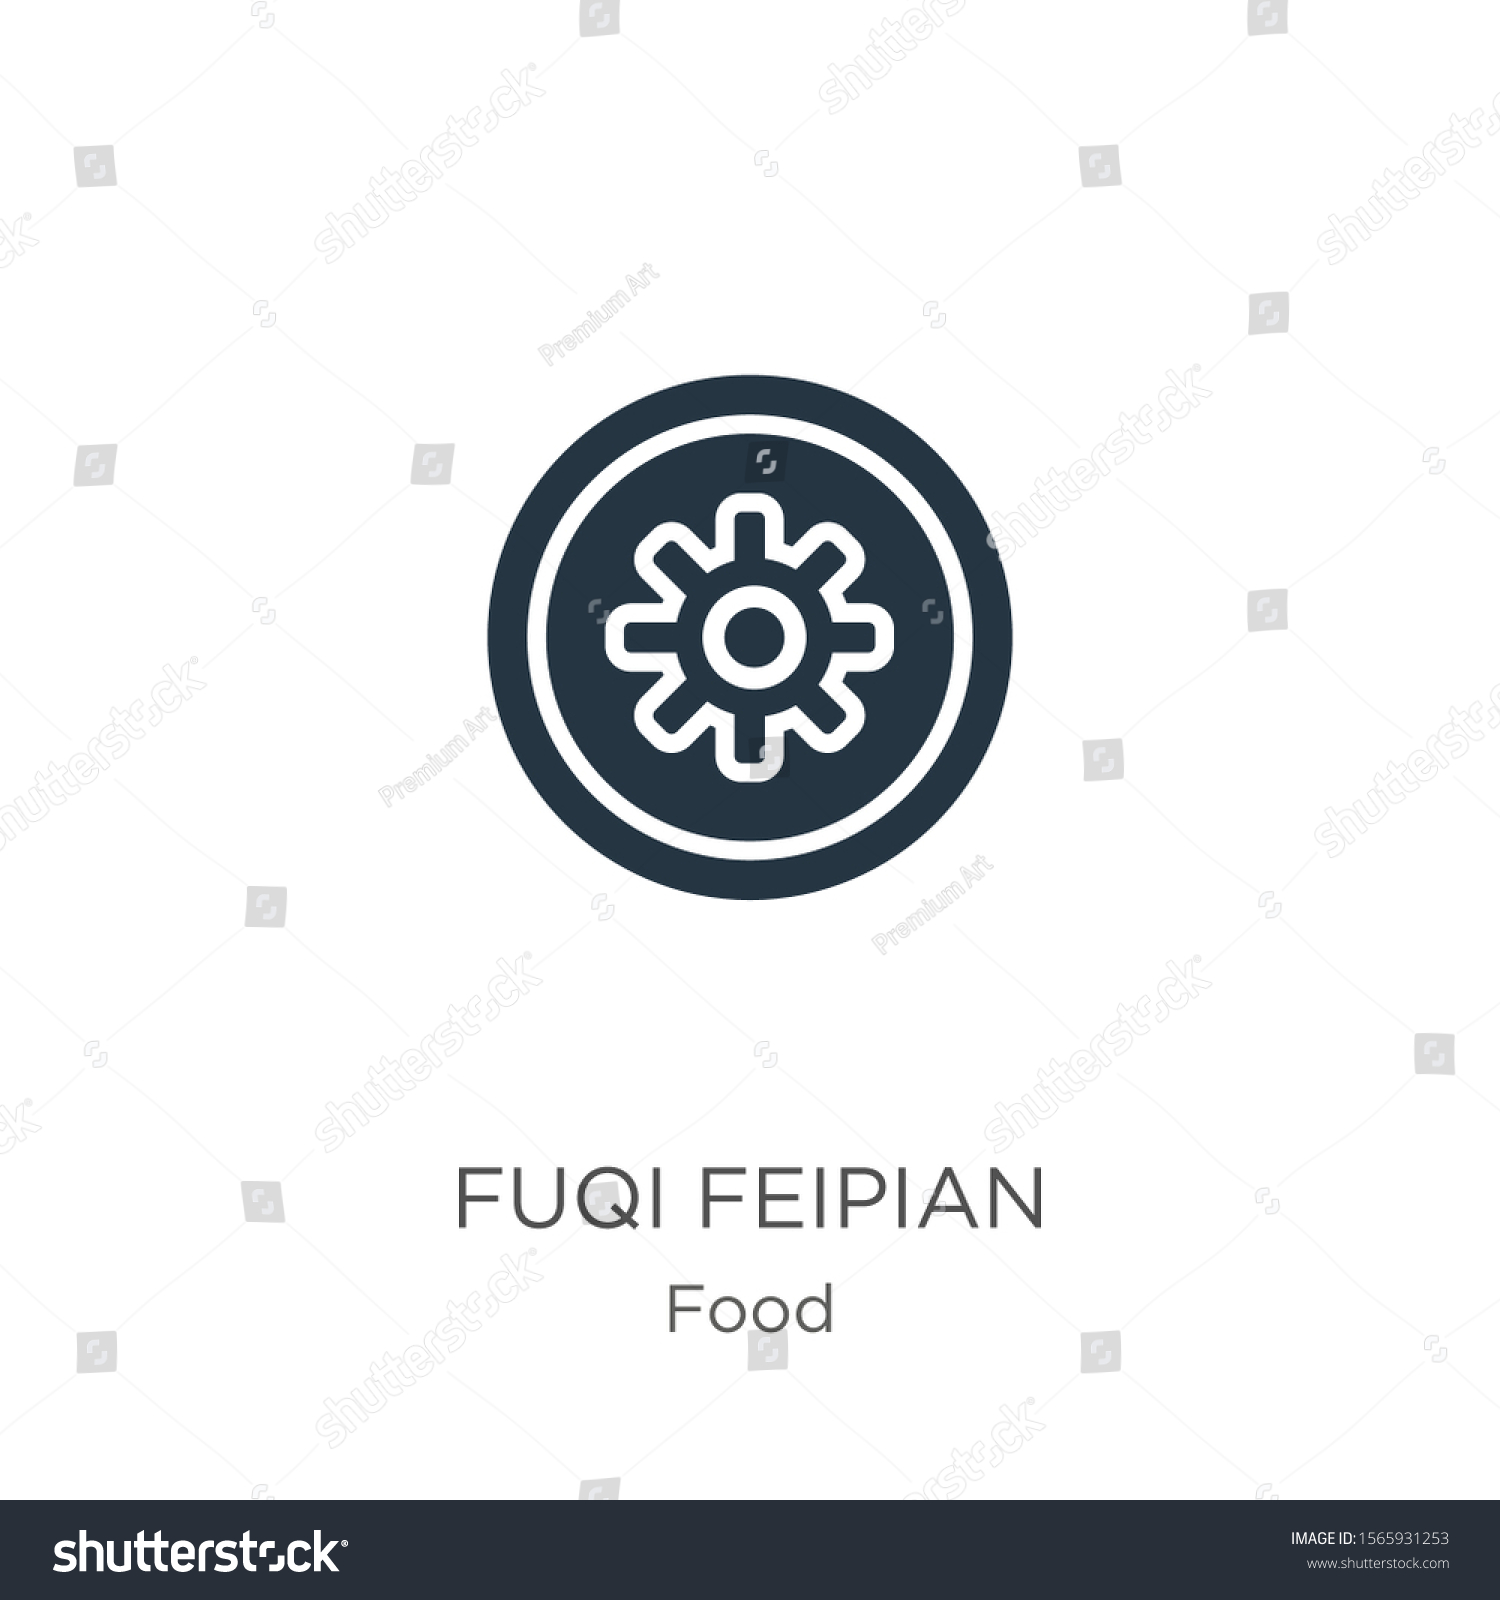 SVG of Fuqi feipian icon vector. Trendy flat fuqi feipian icon from food collection isolated on white background. Vector illustration can be used for web and mobile graphic design, logo, eps10 svg